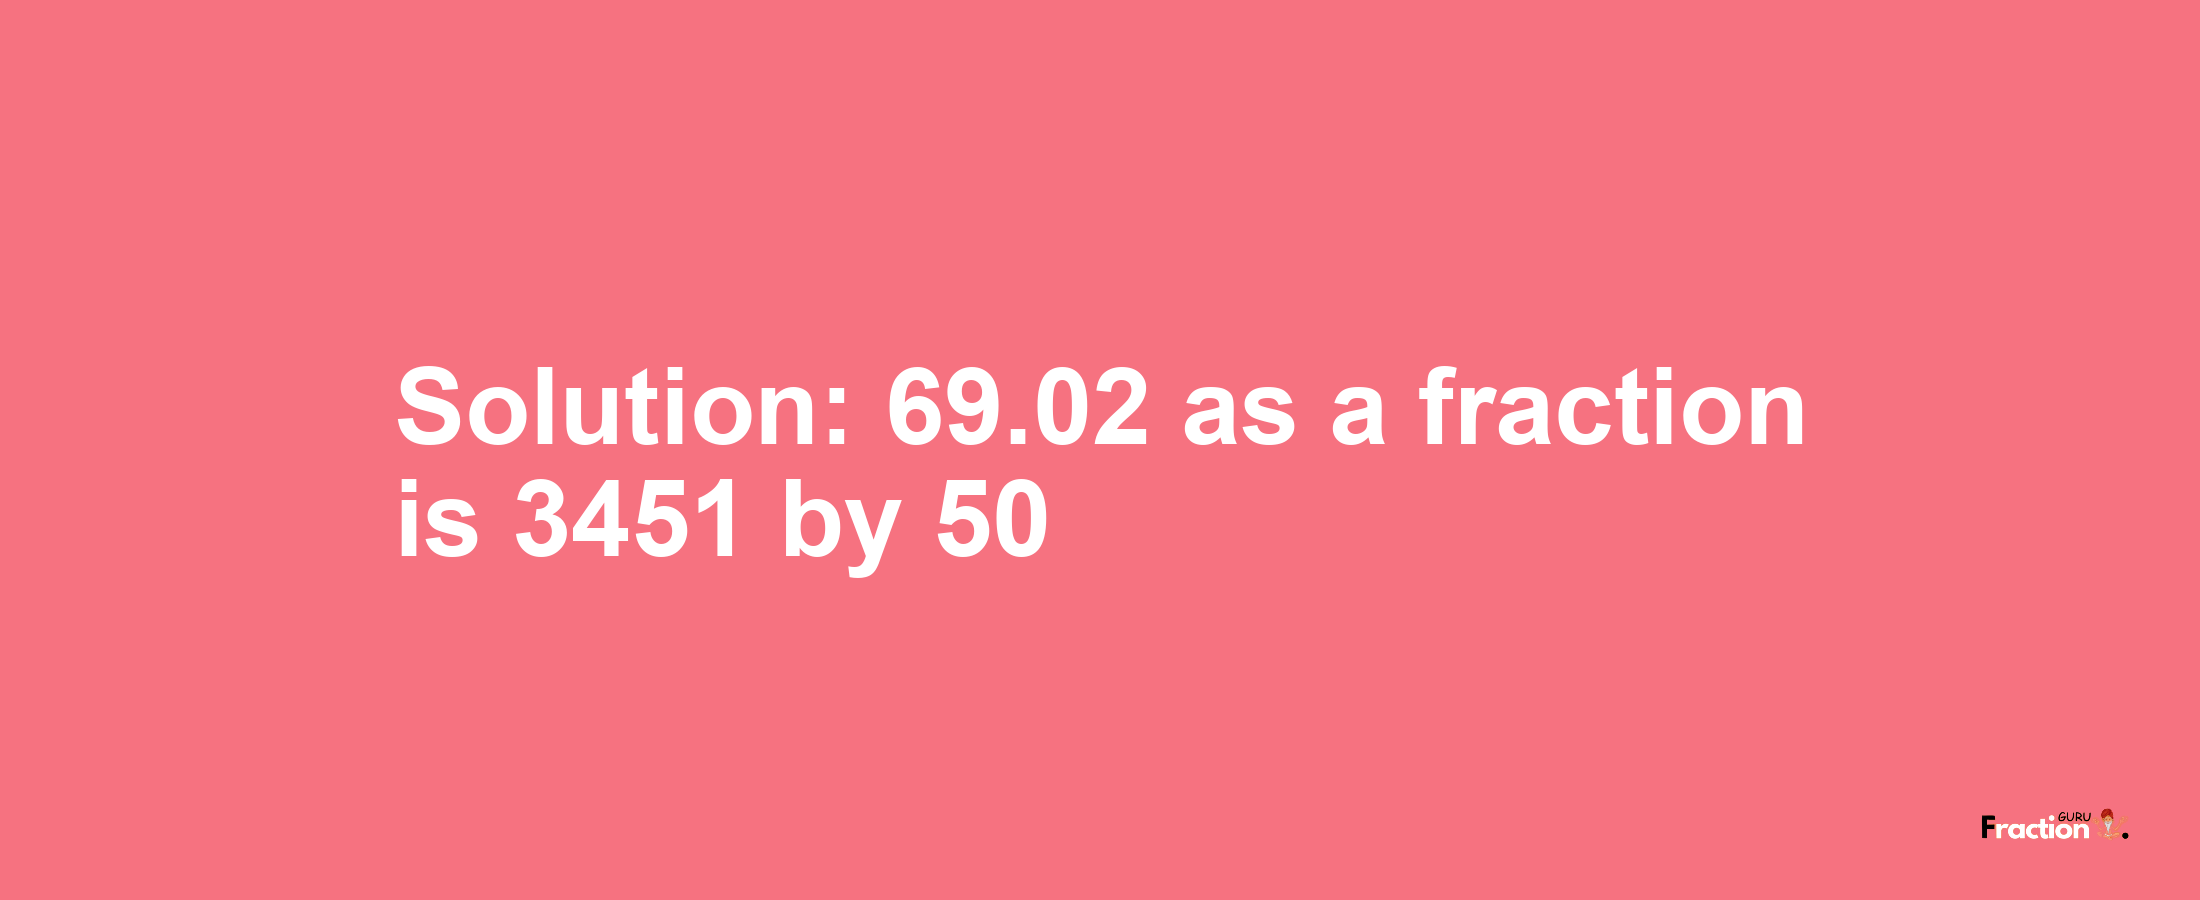 Solution:69.02 as a fraction is 3451/50